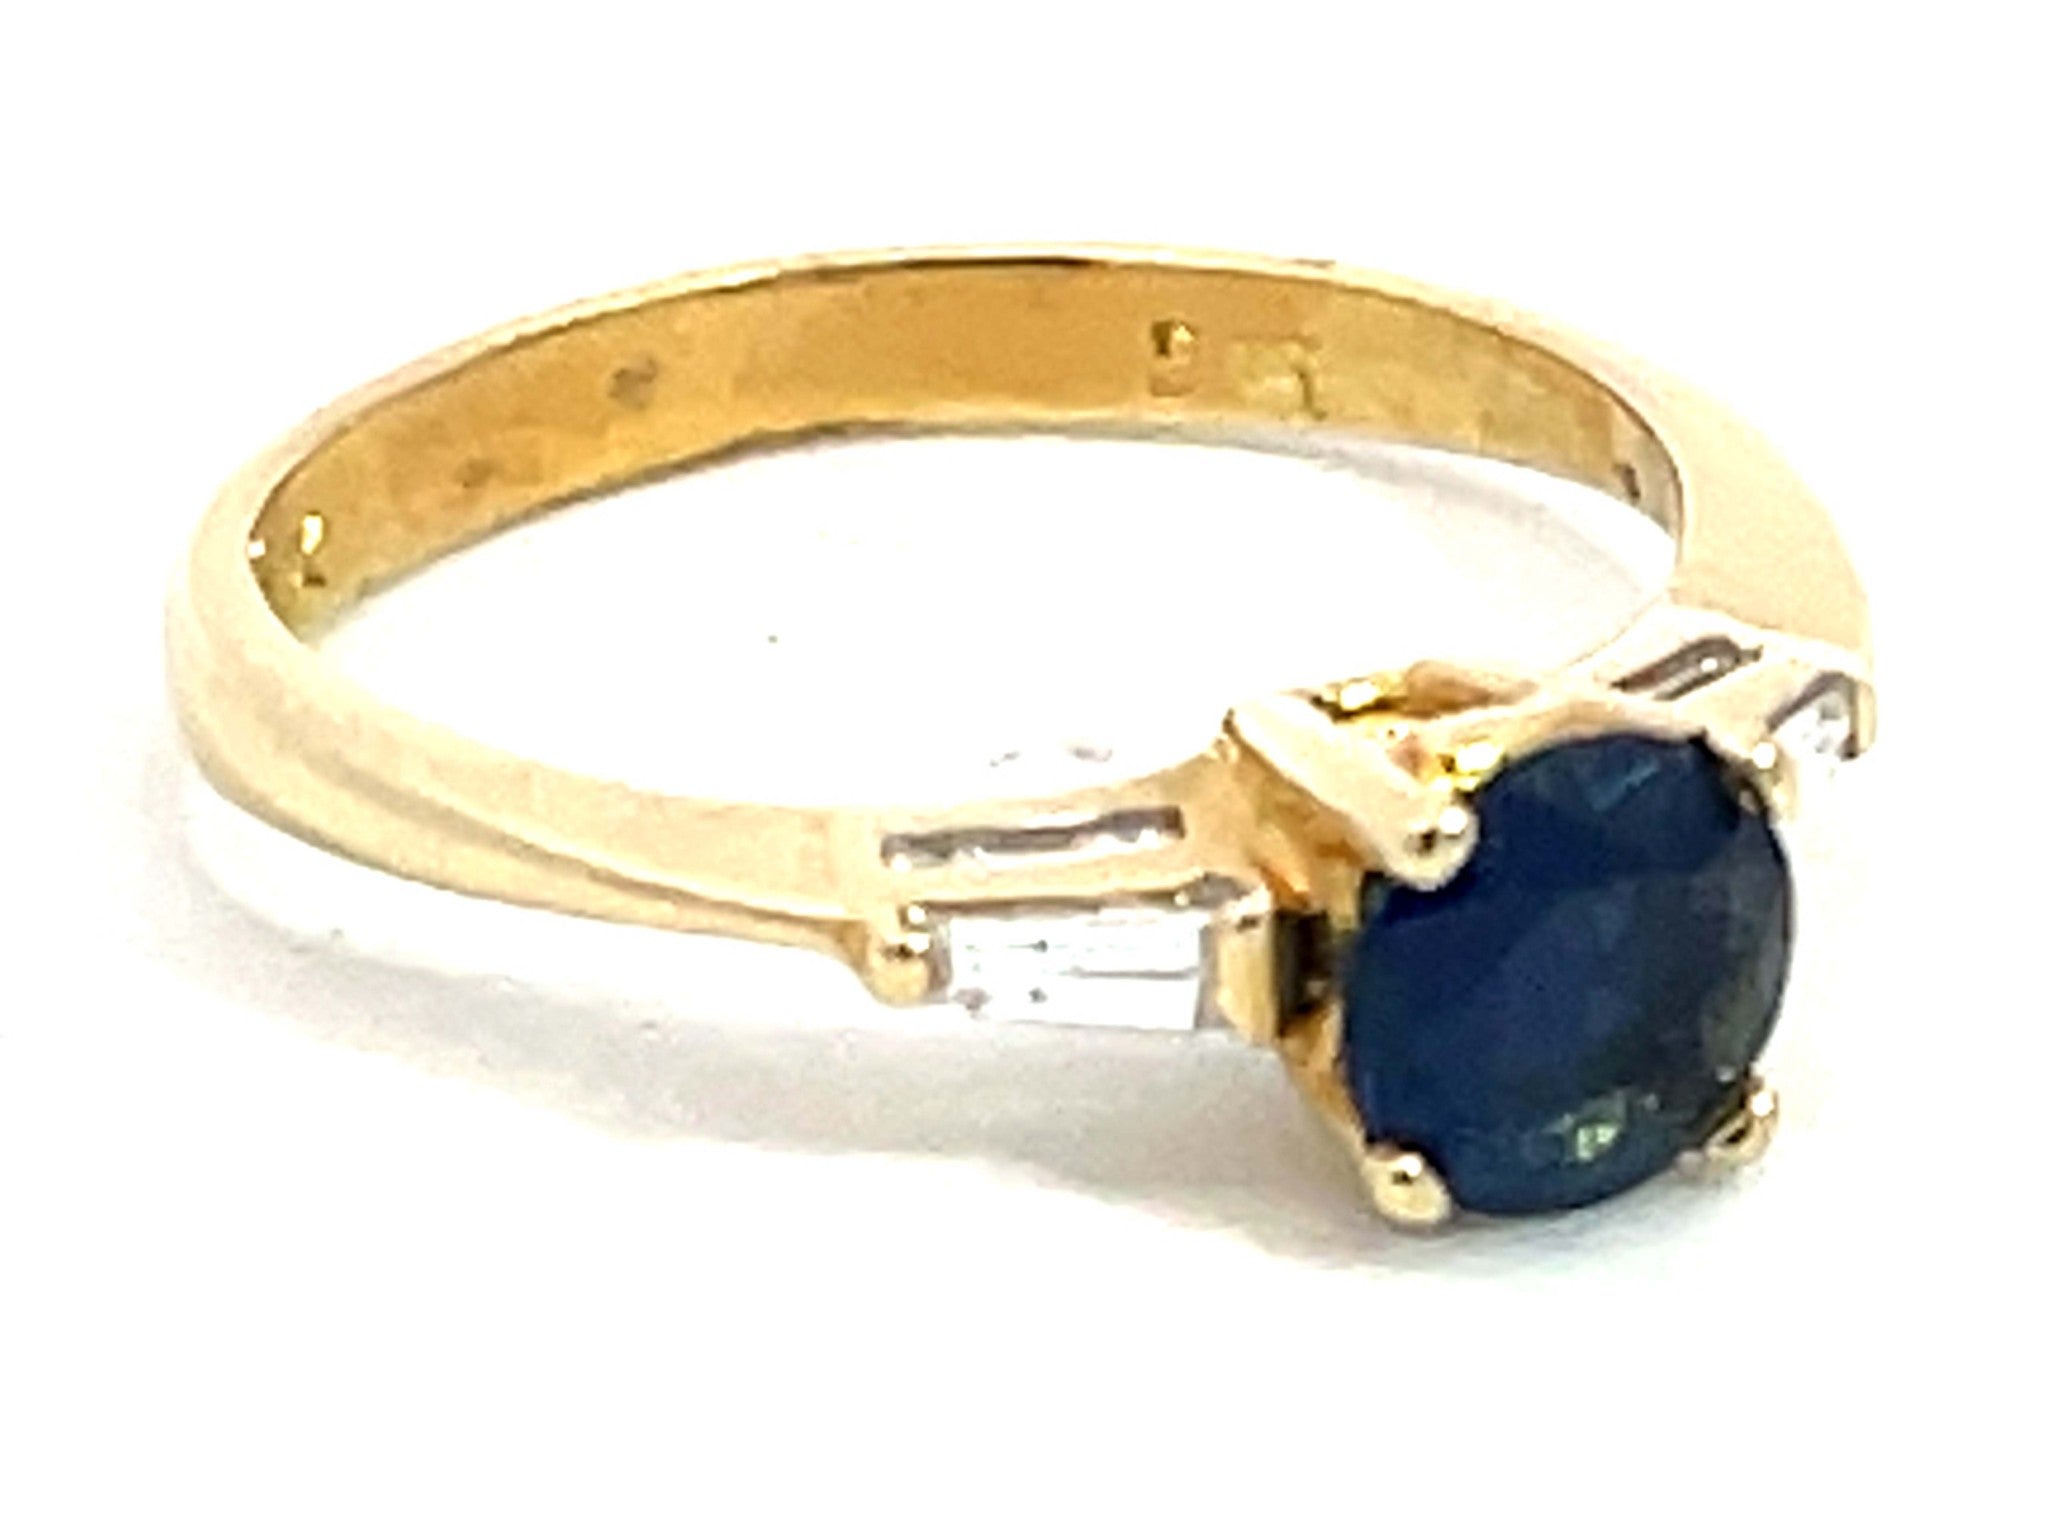 Solitaire Blue Sapphire with Baguette Diamond Accents Ring in 14k Yellow Gold